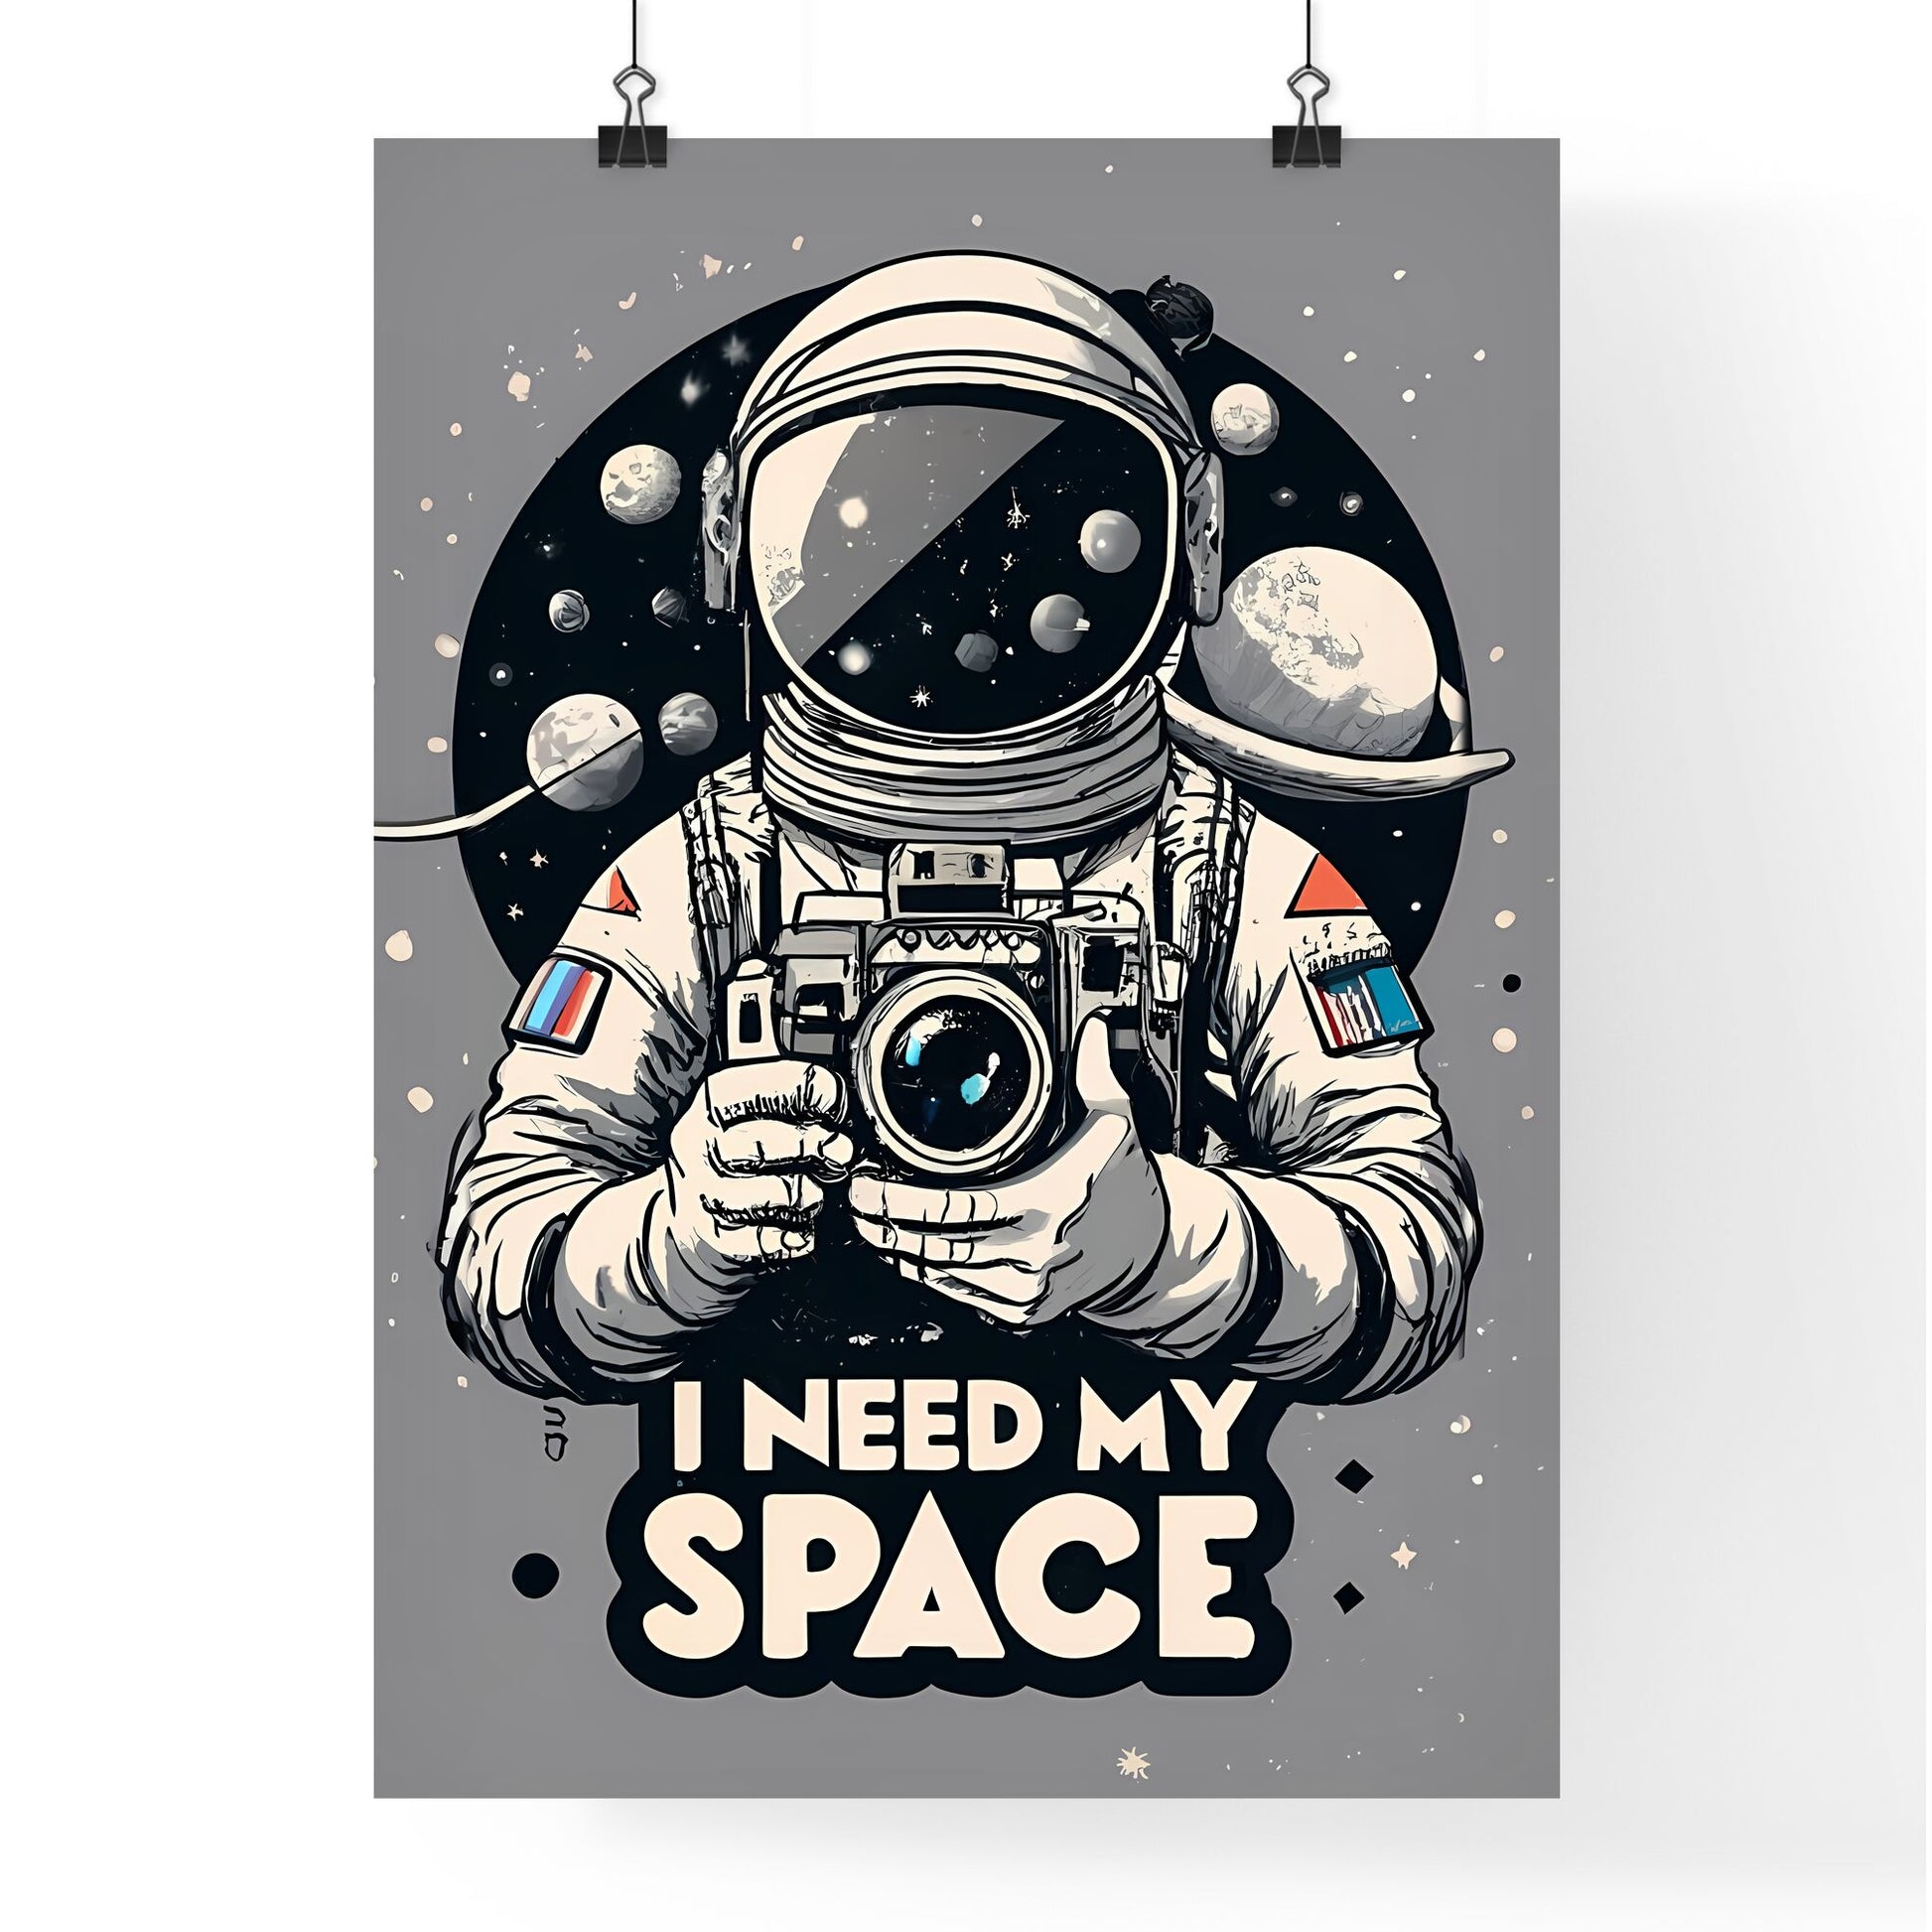 I Need My Space - A Person In An Astronaut Suit Holding A Camera Art Print Default Title